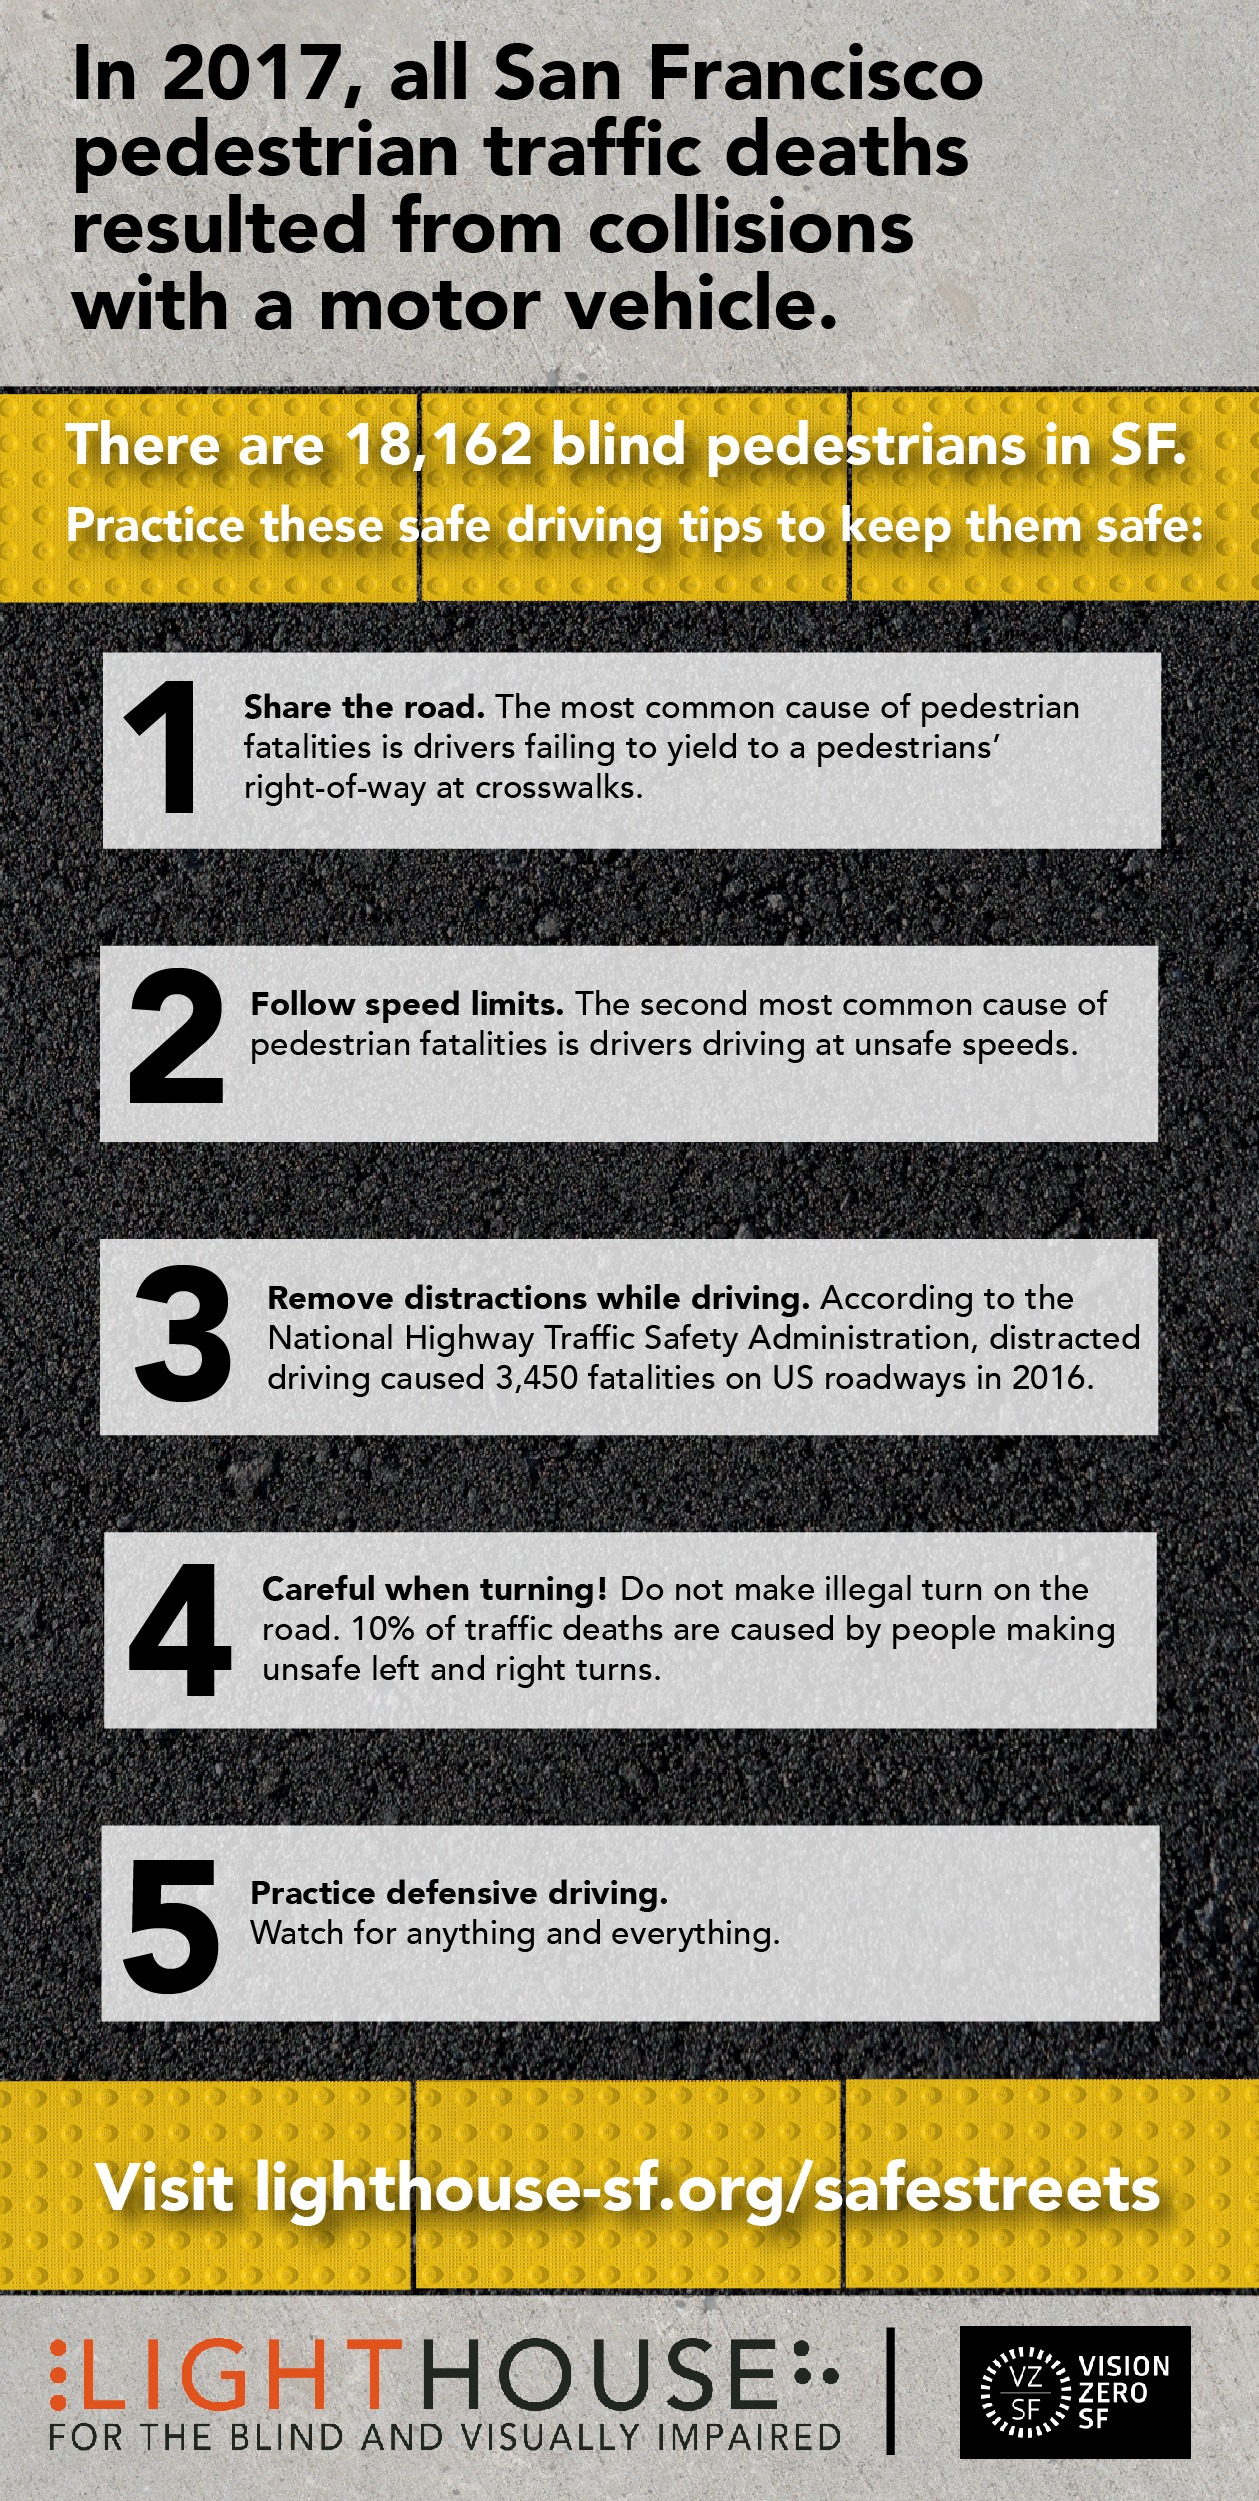 Infographic 3: How can drivers help reduce pedestrian fatalities? Click the link for graphic description.